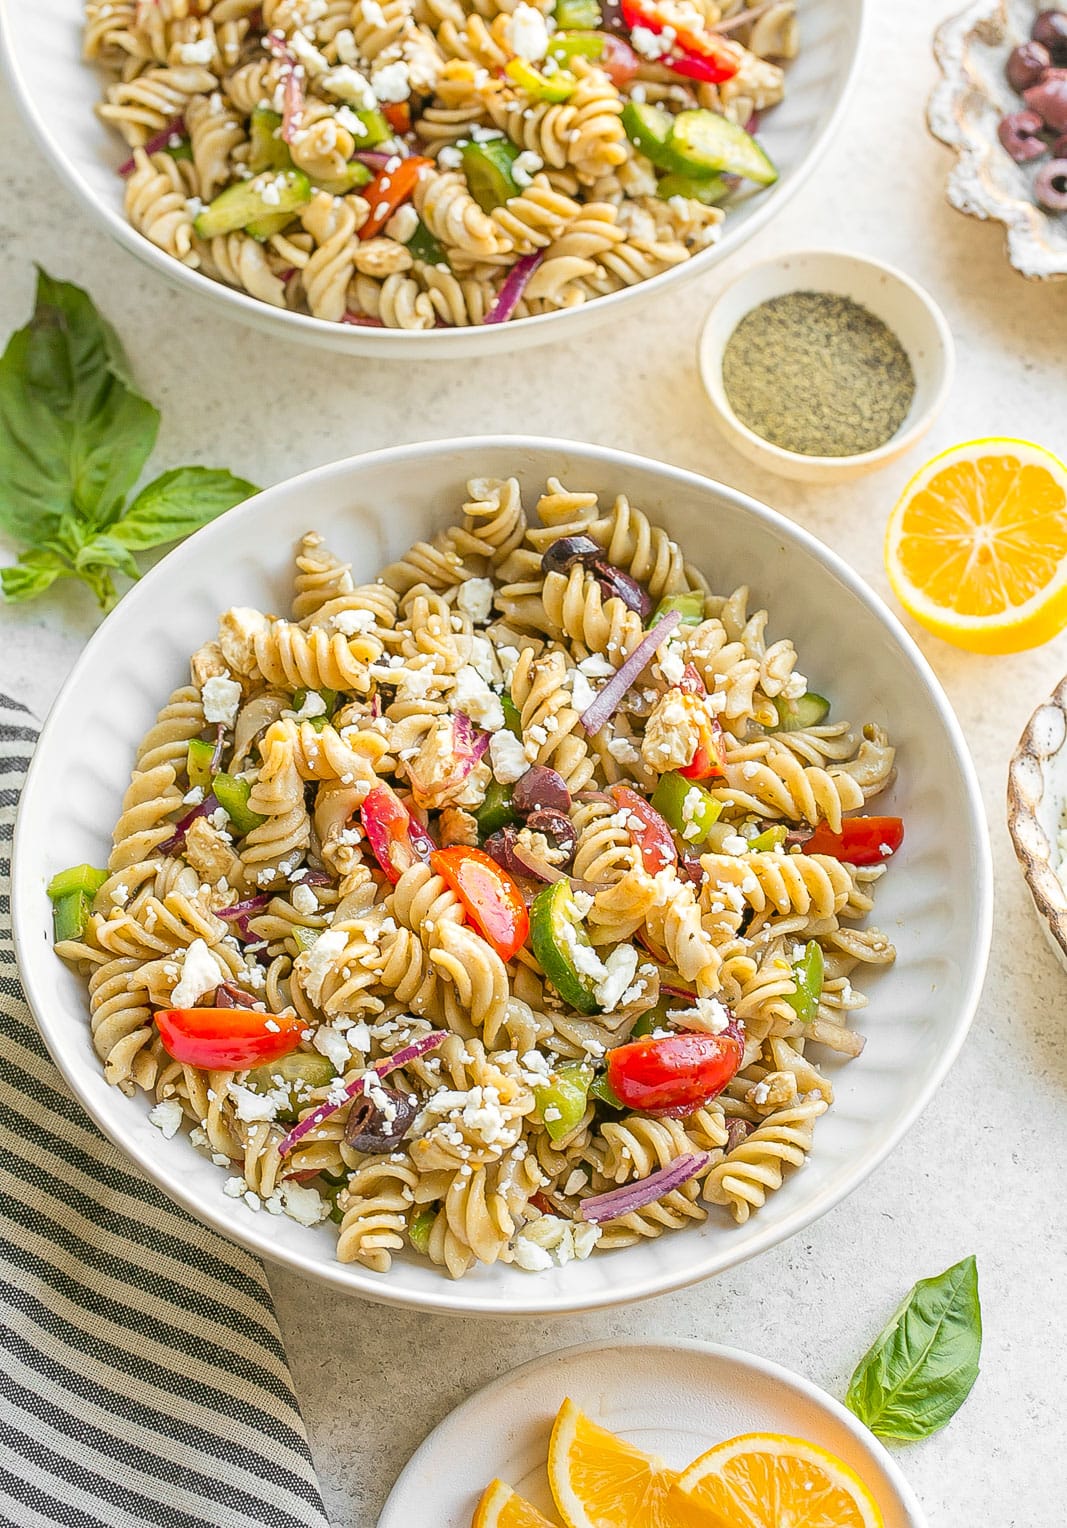 Whole Wheat Pasta Salad in a bowl.